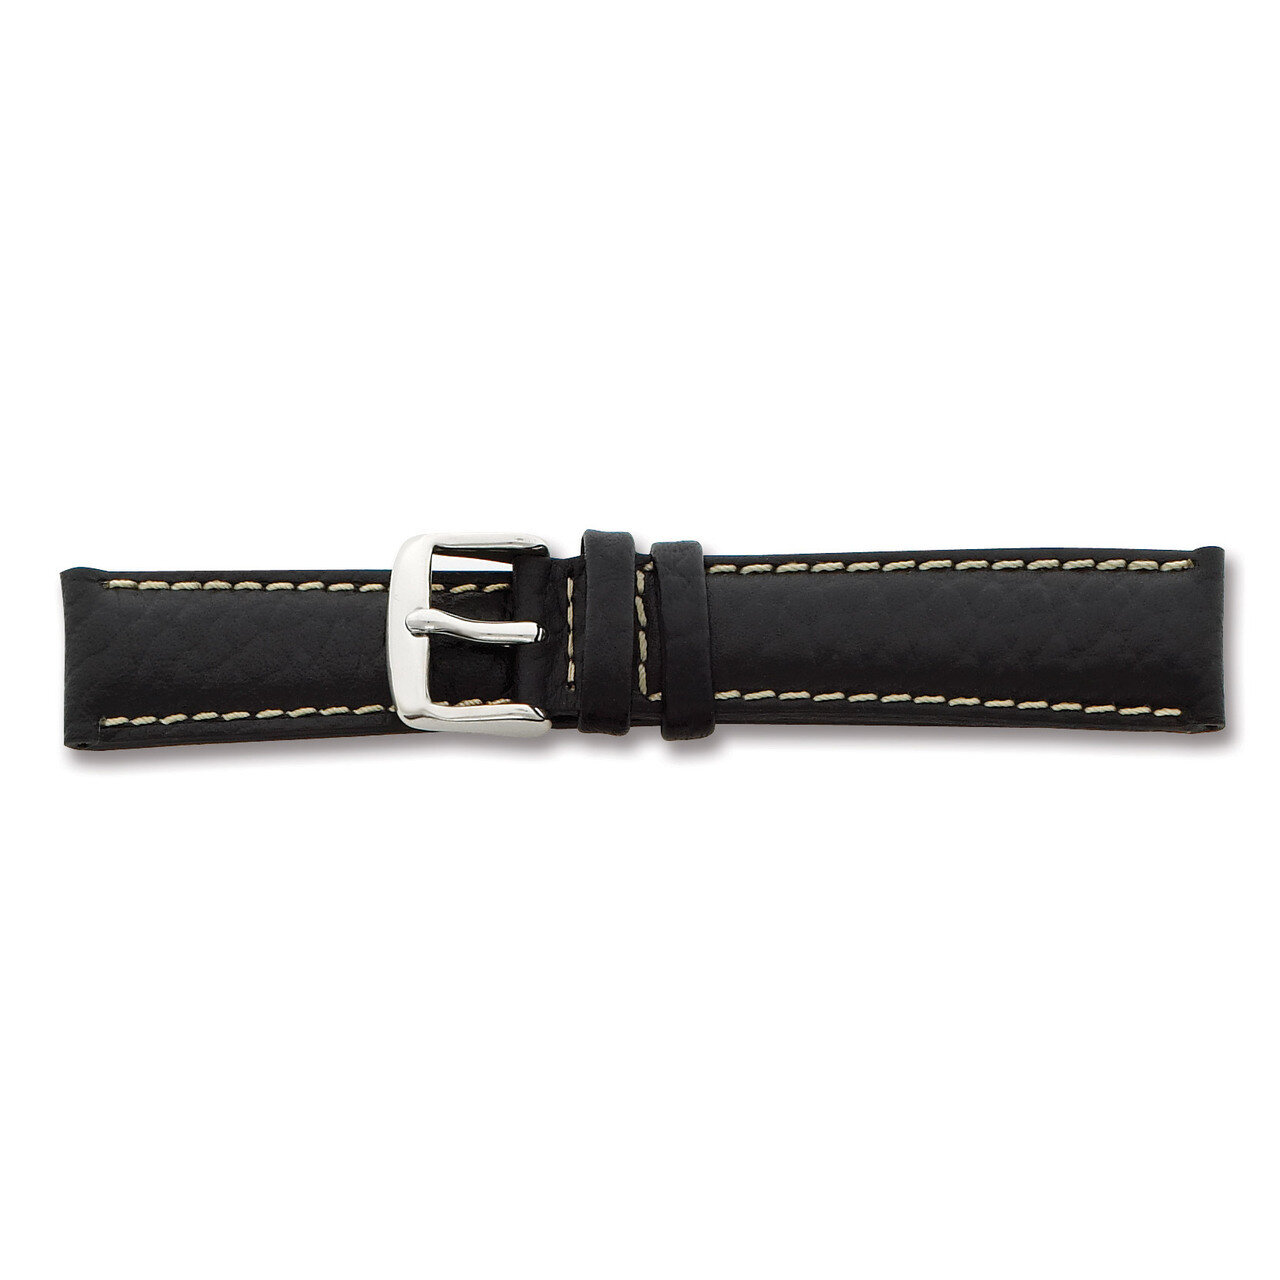 26mm Black Leather White Stitch Watch Band 7.5 Inch Silver-tone Buckle BA99-26